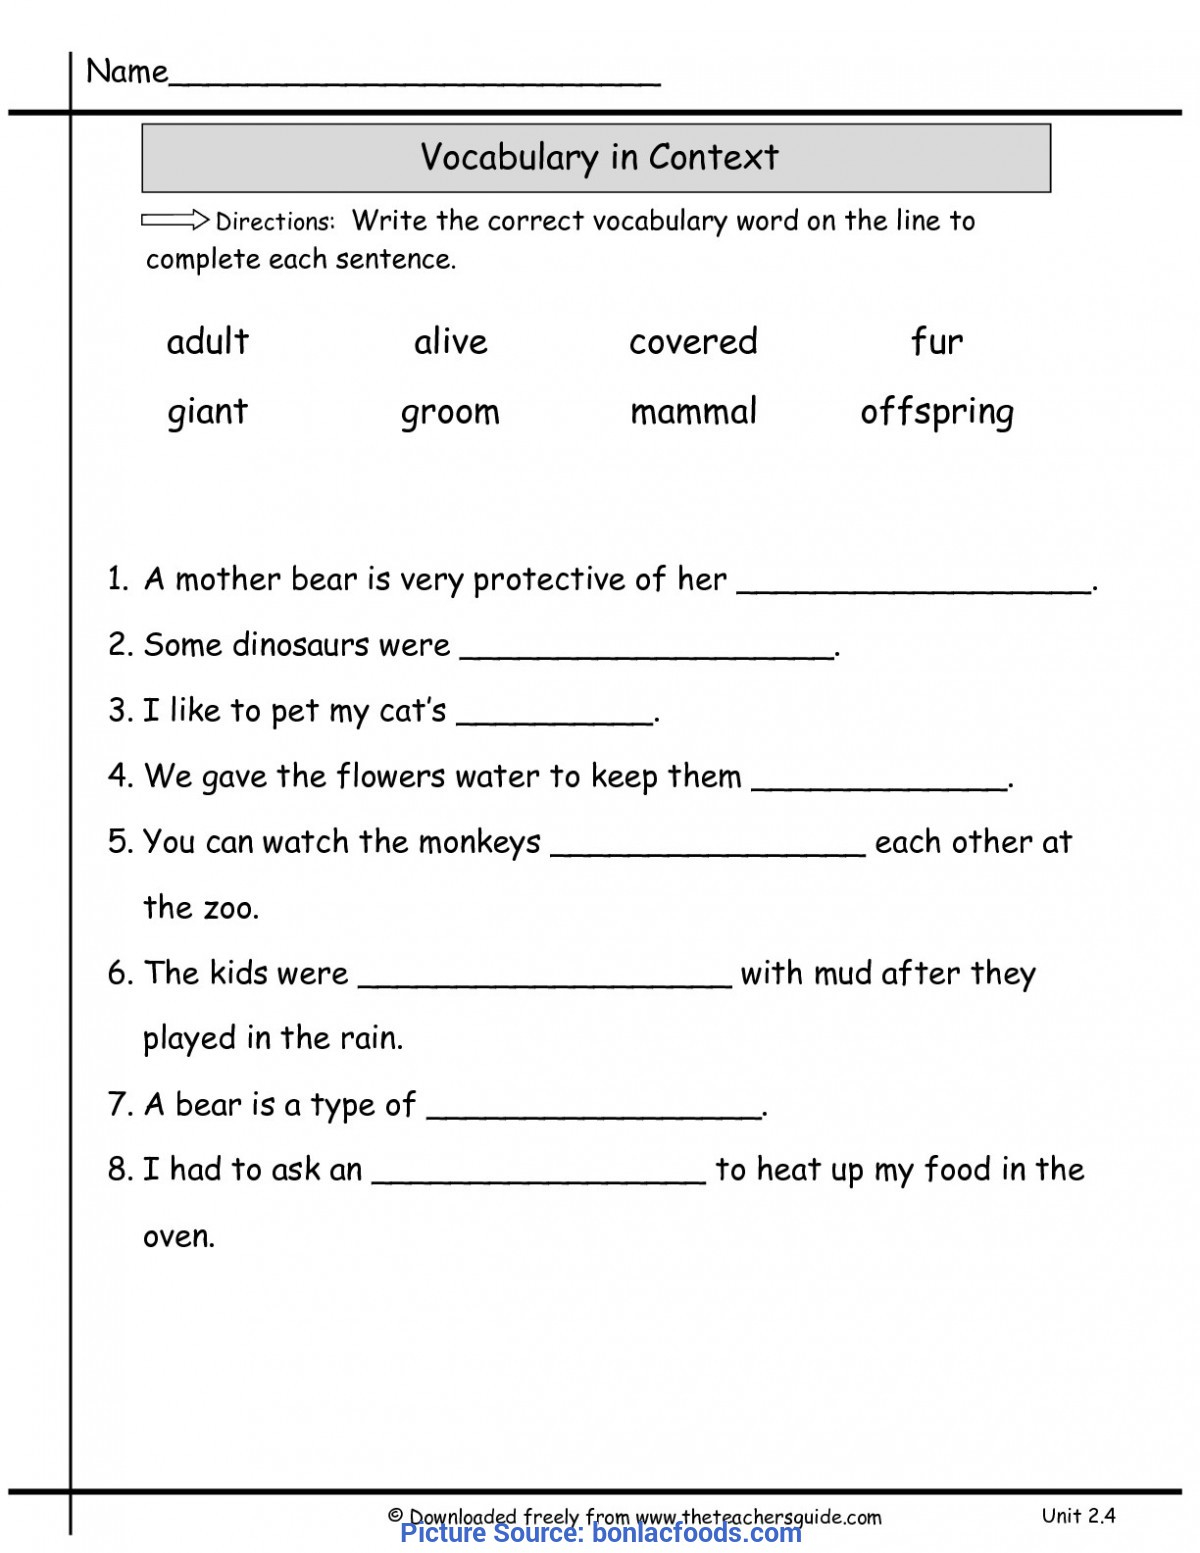 4The Social Studies Worksheets Valuable Lessons For 2Nd All